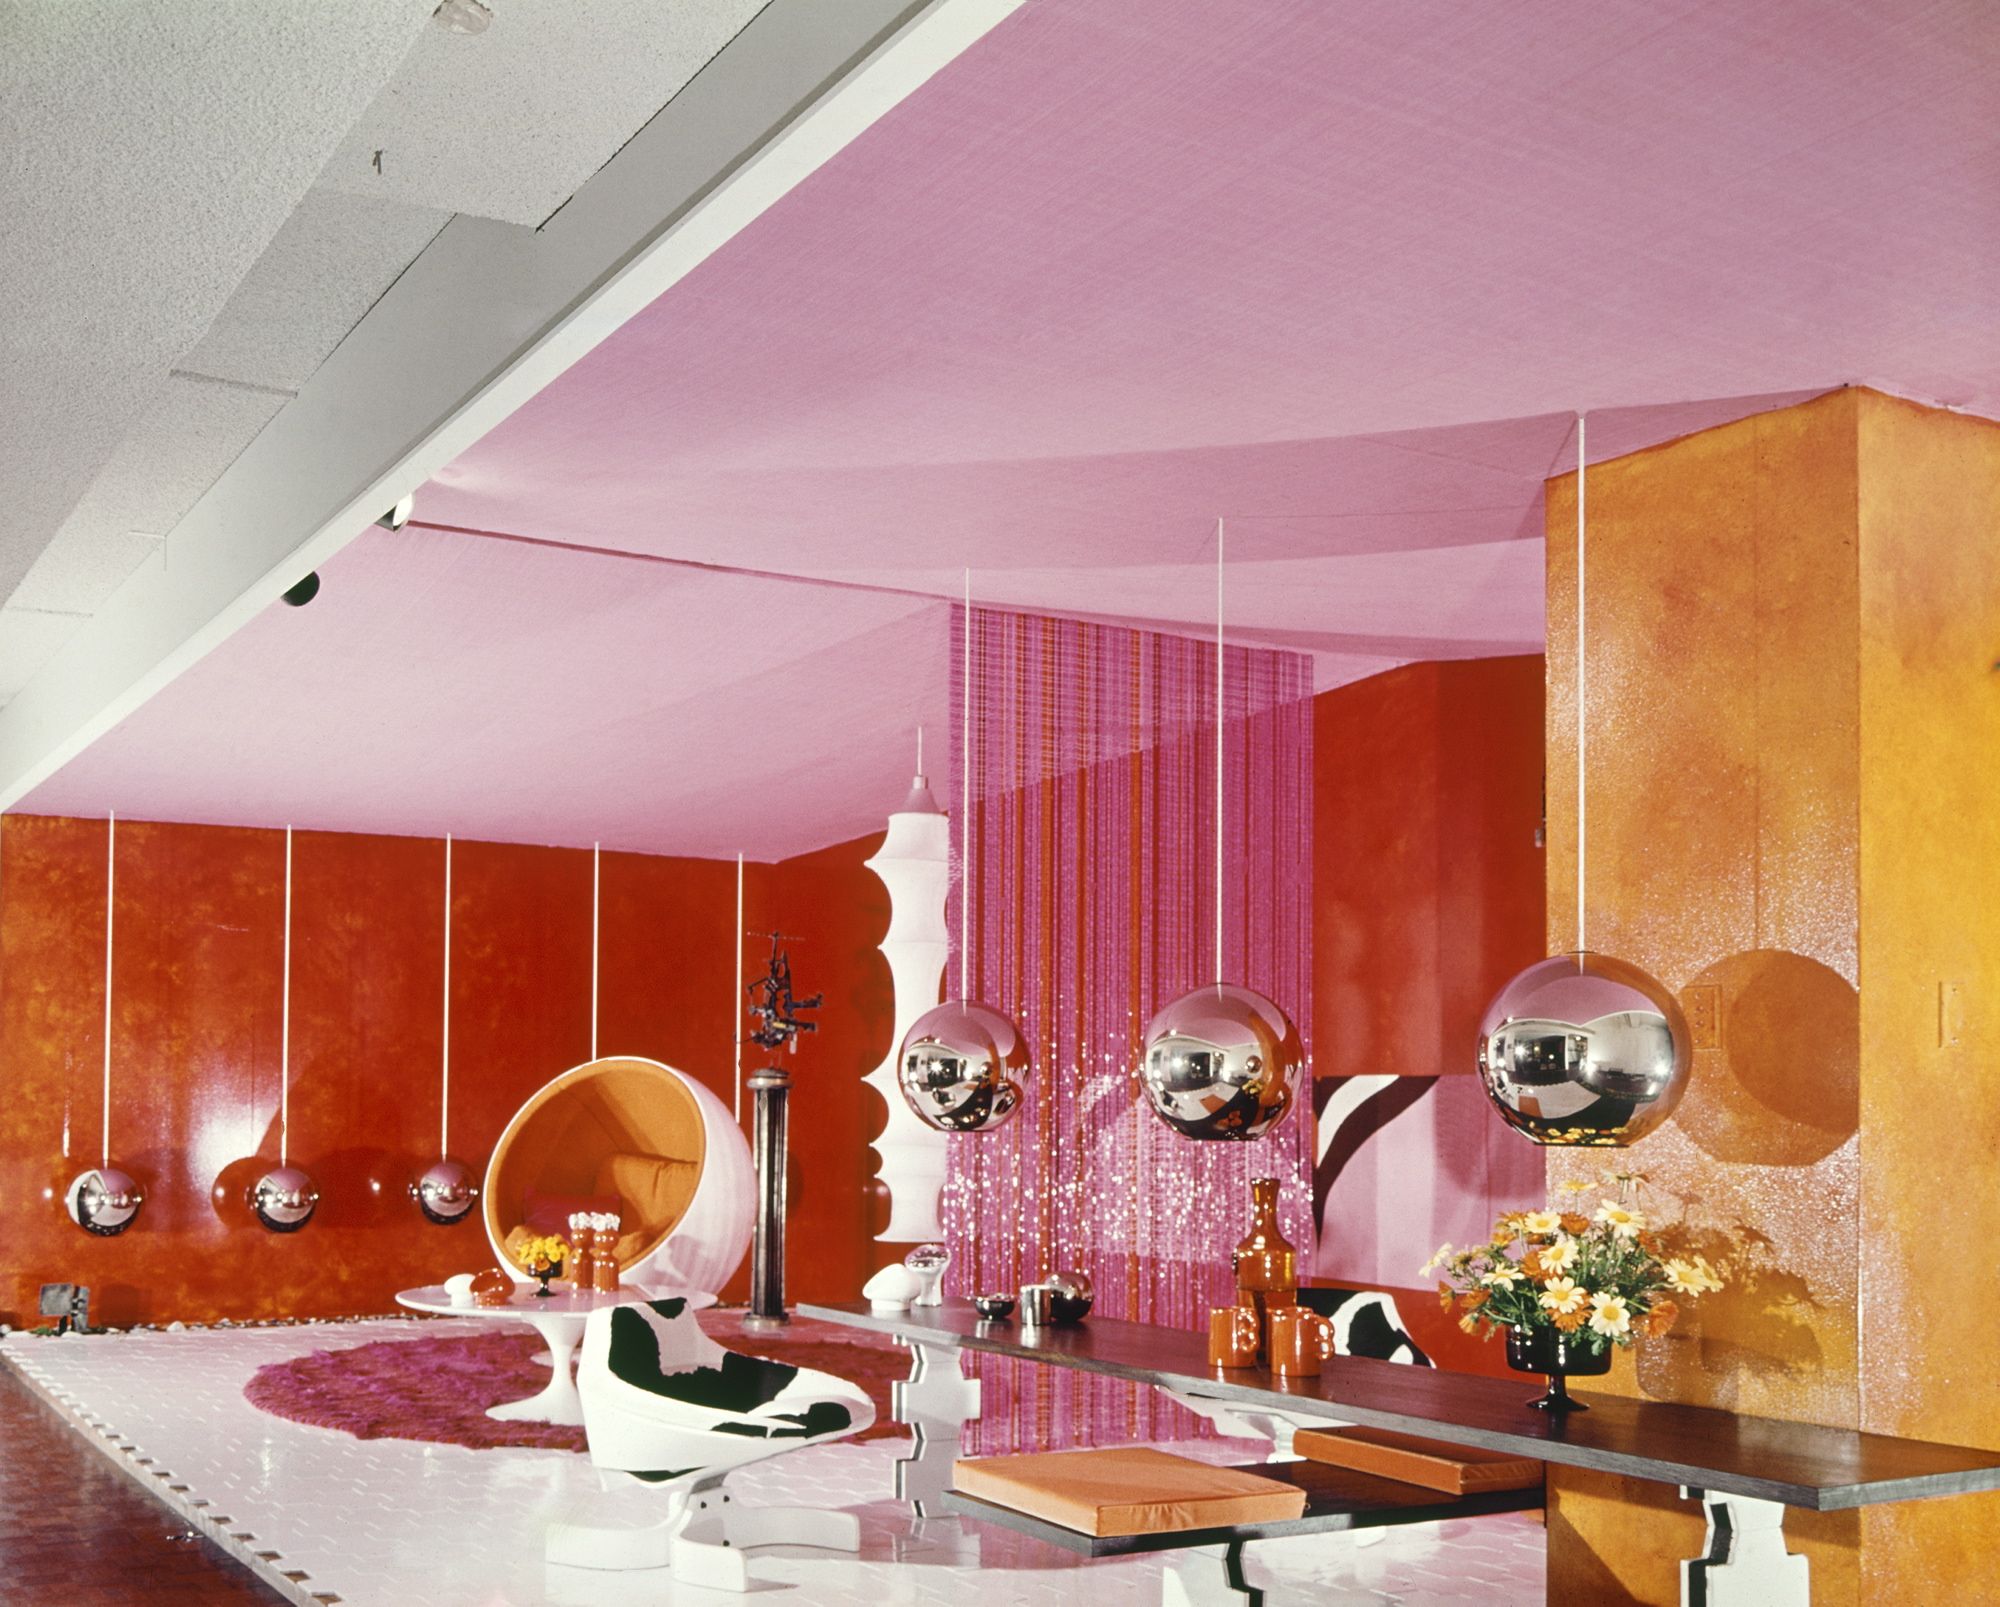 Interior of a room in 1960s style.